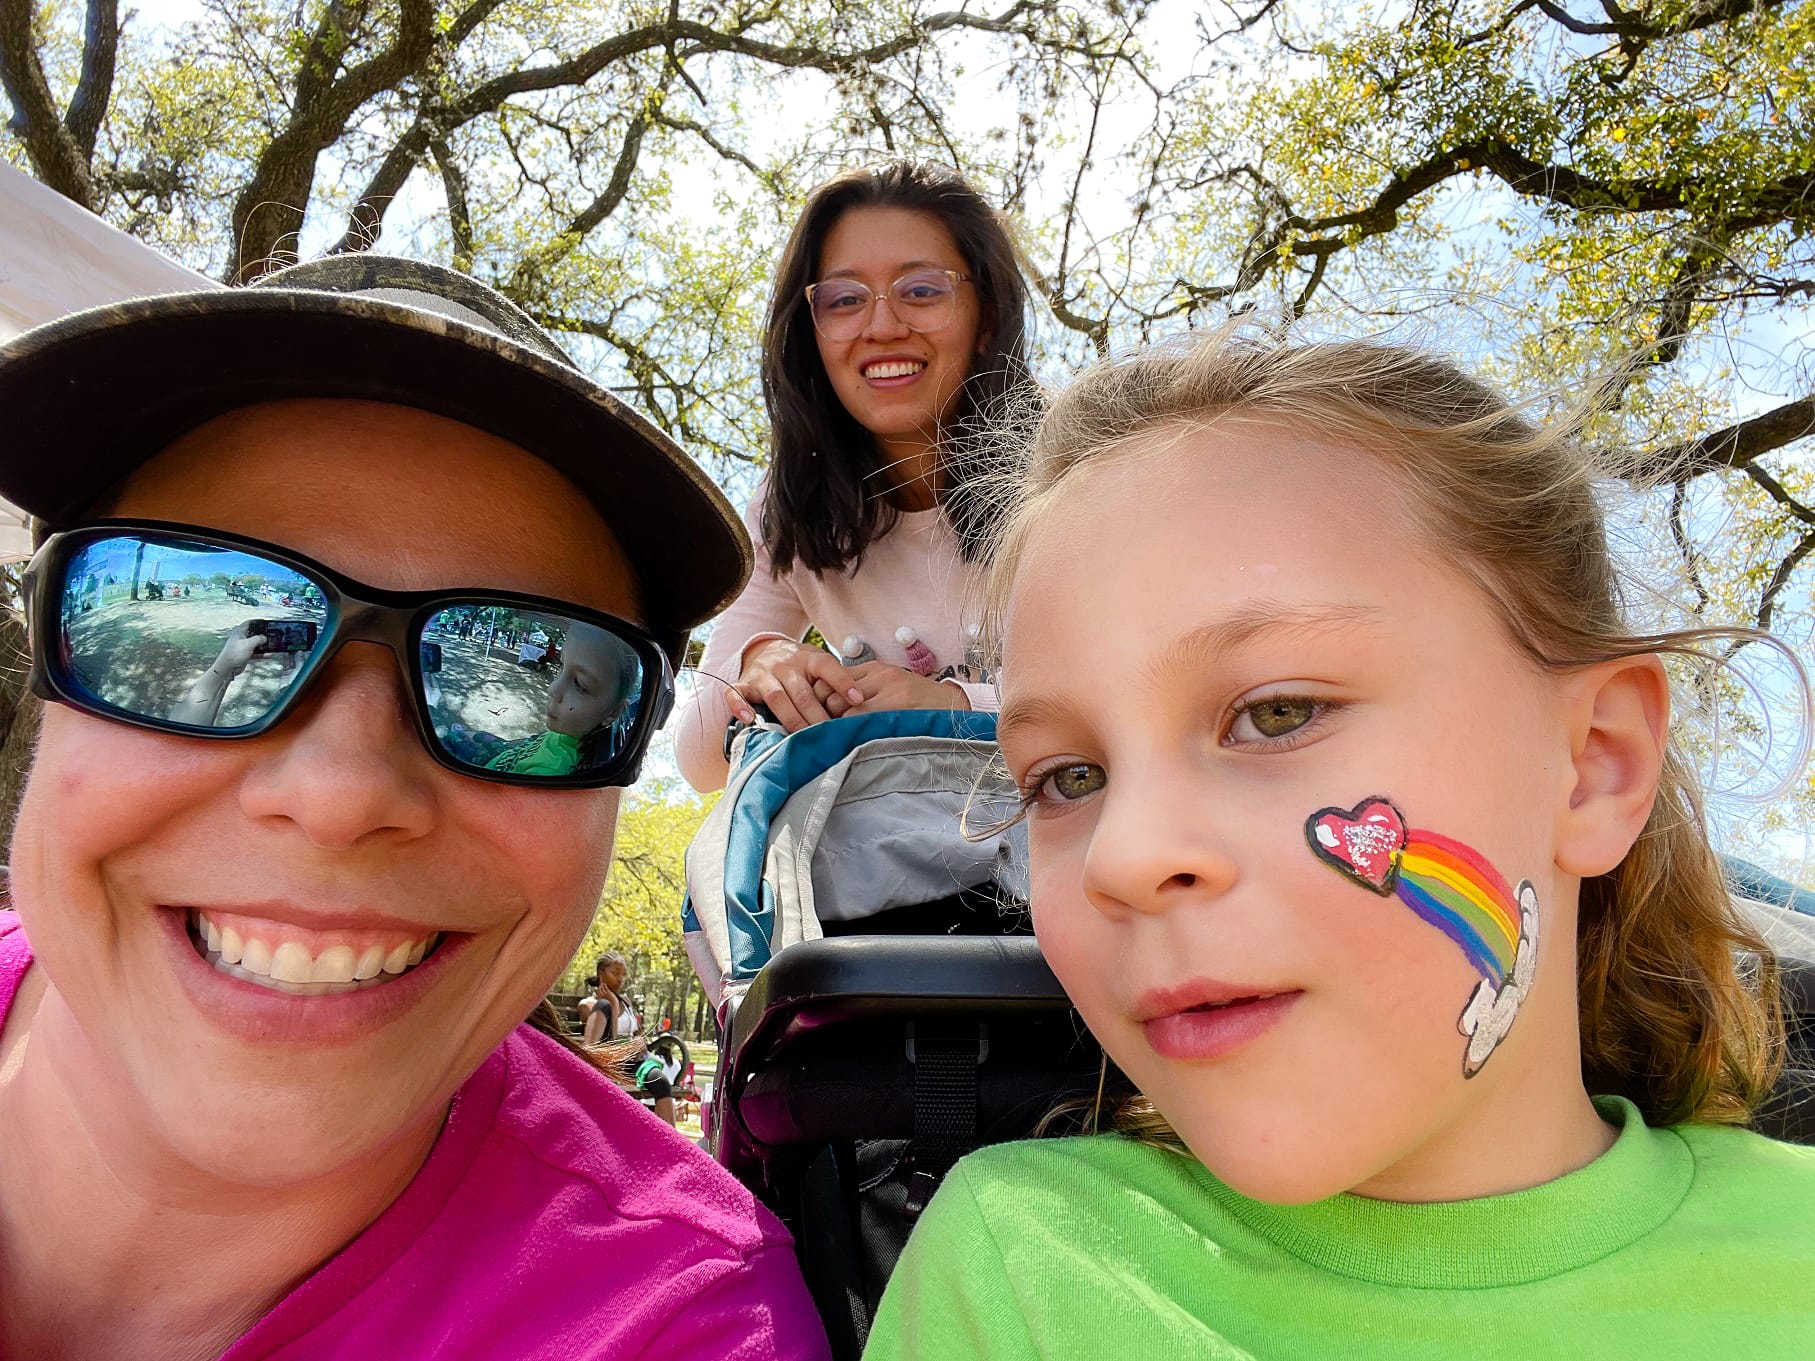 This Texas host family is taking a sunny stroll with their au pair